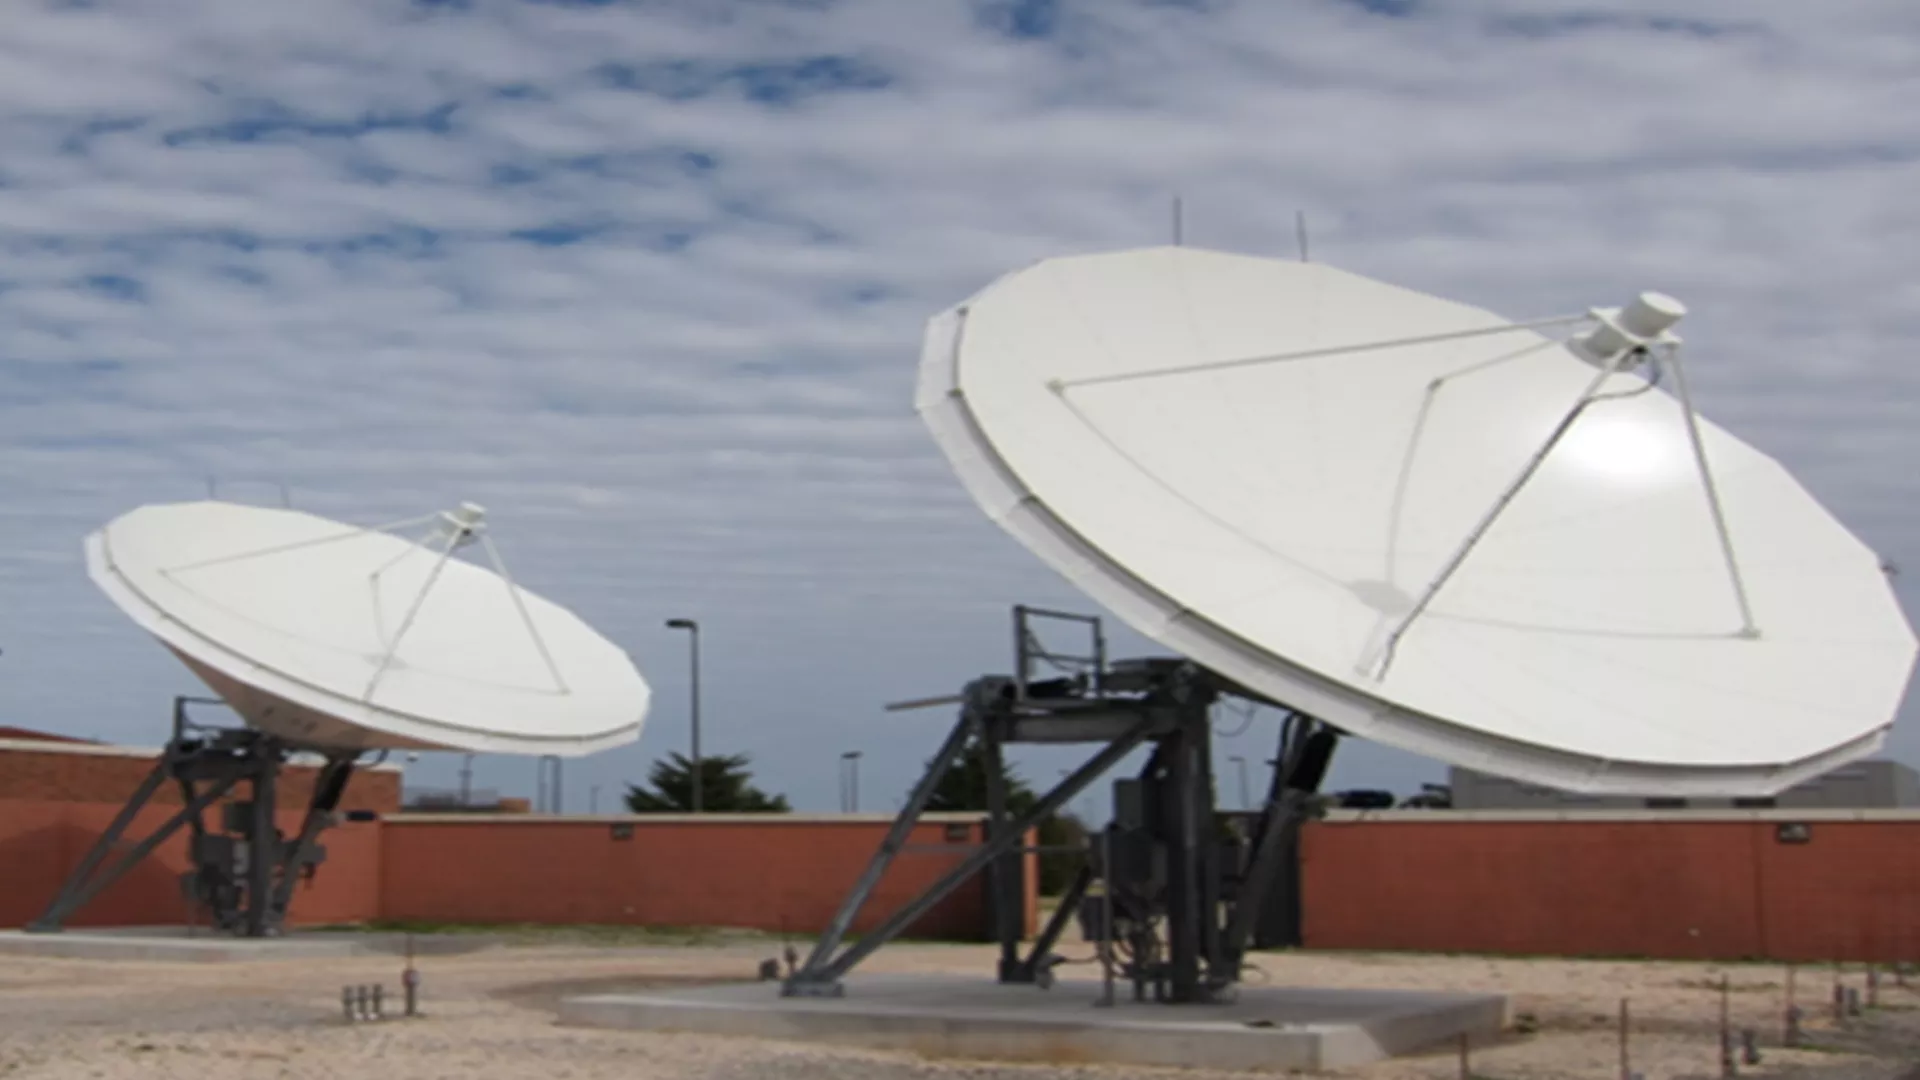 Image of a satellite dishes on top of a building.